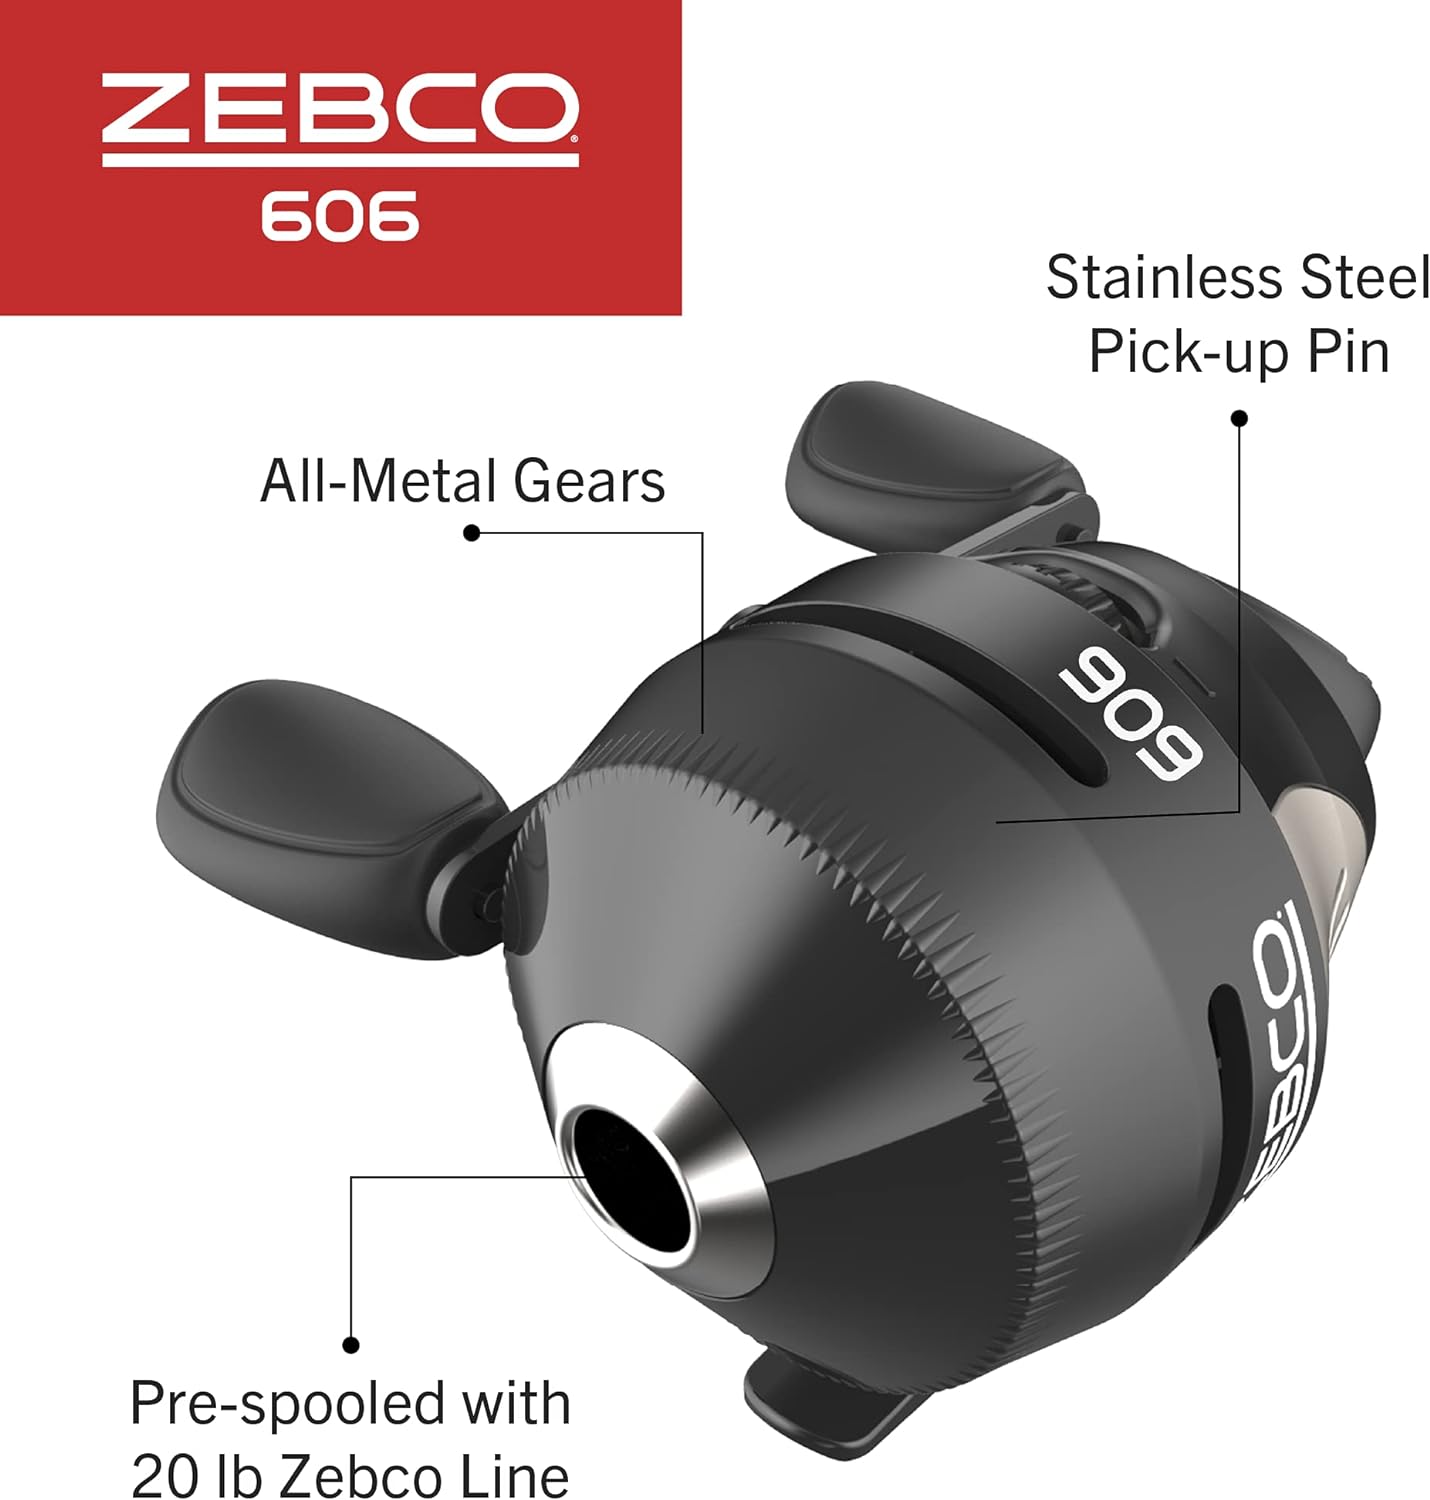 Zebco 606 Spincast Fishing Reel, Size 60 Reel, Right-Hand Retrieve, Pre-Spooled With 20-Pound Zebco Fishing Line, Quickset Anti-Reverse And Dial-Adjustable Drag, Black, Clam Packaging